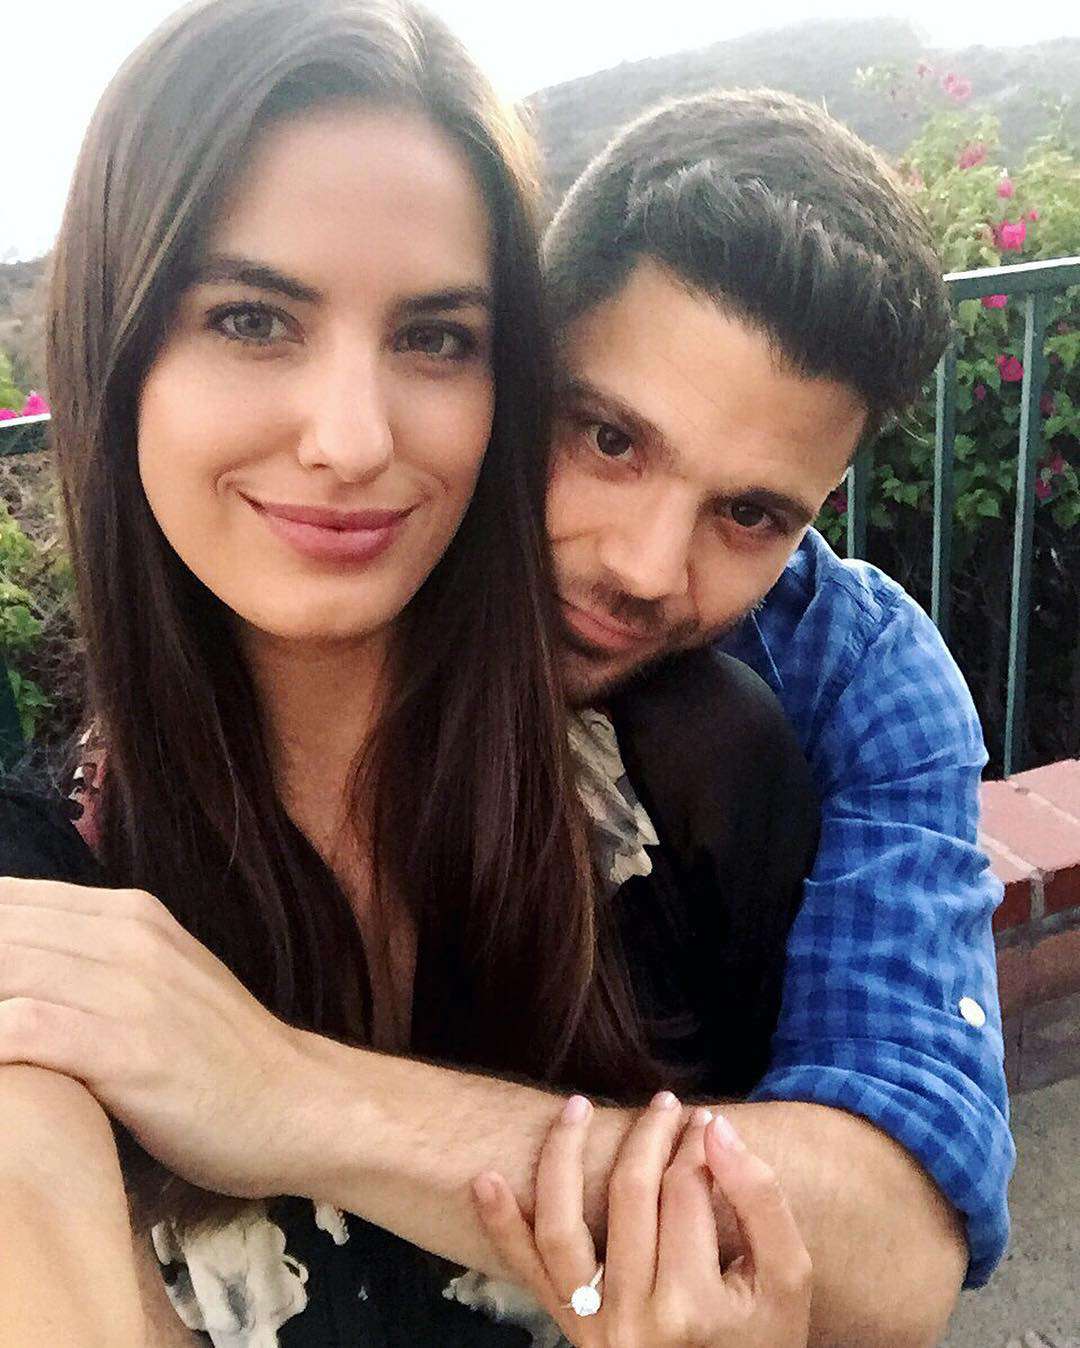 Jerry Ferrara and Breanne Racano engaged